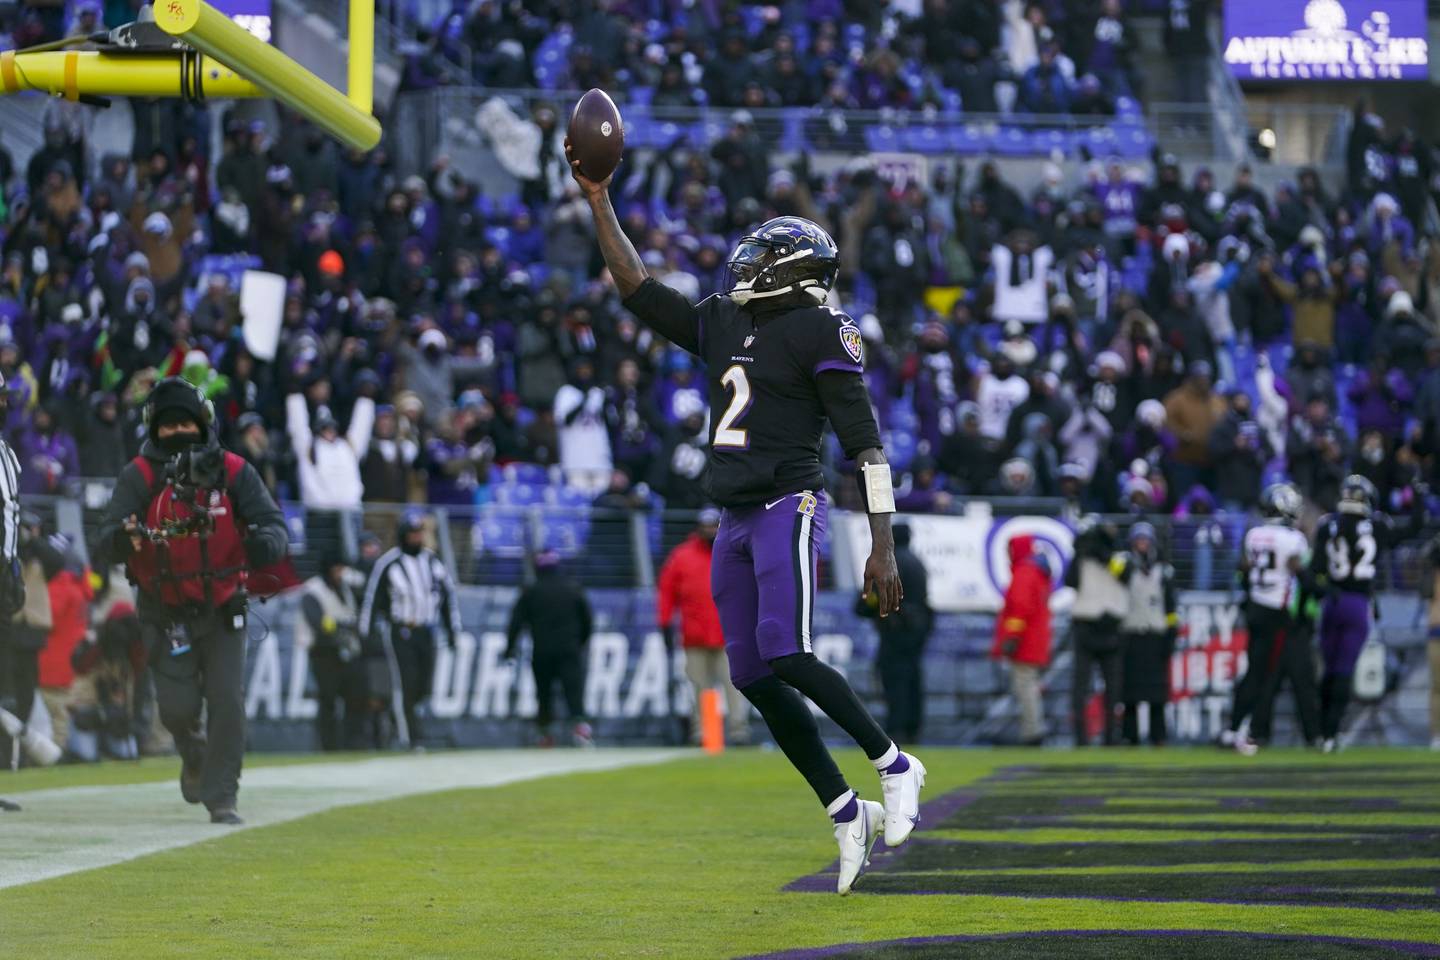 Baltimore Ravens quarterback Tyler Huntley (2) celebrates his 2-point conversion during the first half of an NFL football game against the Atlanta Falcons, Saturday, Dec. 24, 2022, in Baltimore.